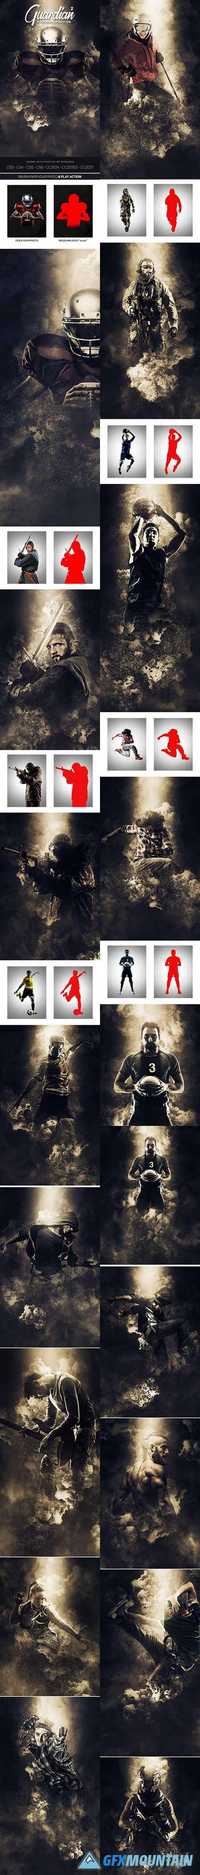 GraphicRiver - Guardian II Photoshop Action - 19416164